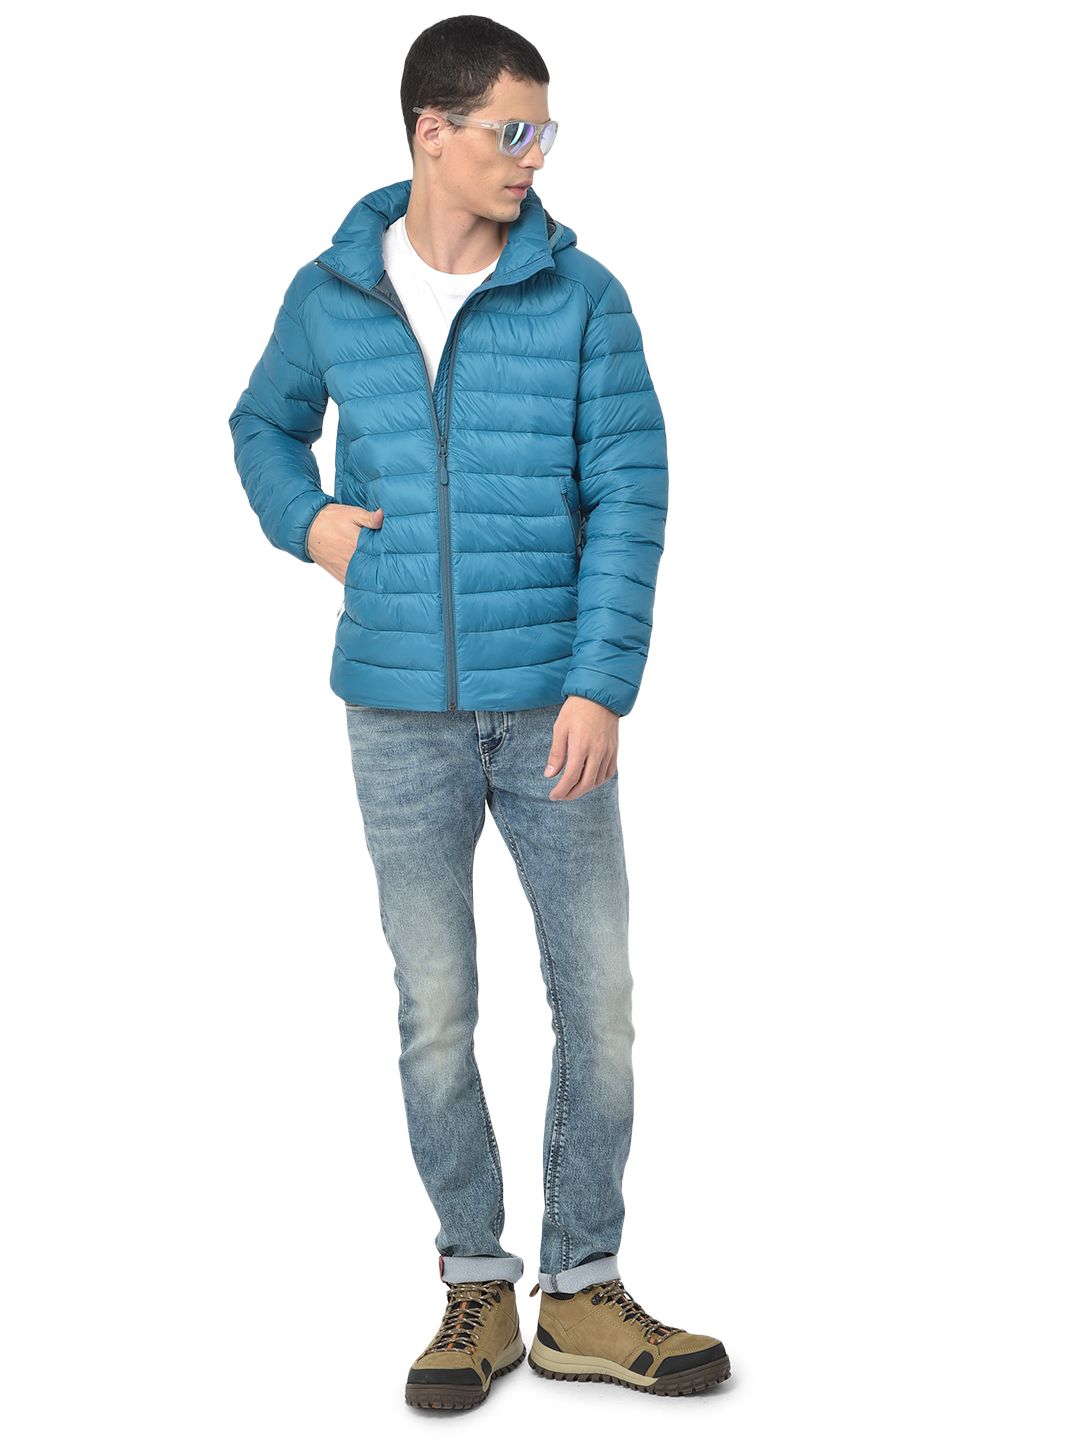 Fashionable woodland jacket for men For Comfort And Style - Alibaba.com-thanhphatduhoc.com.vn